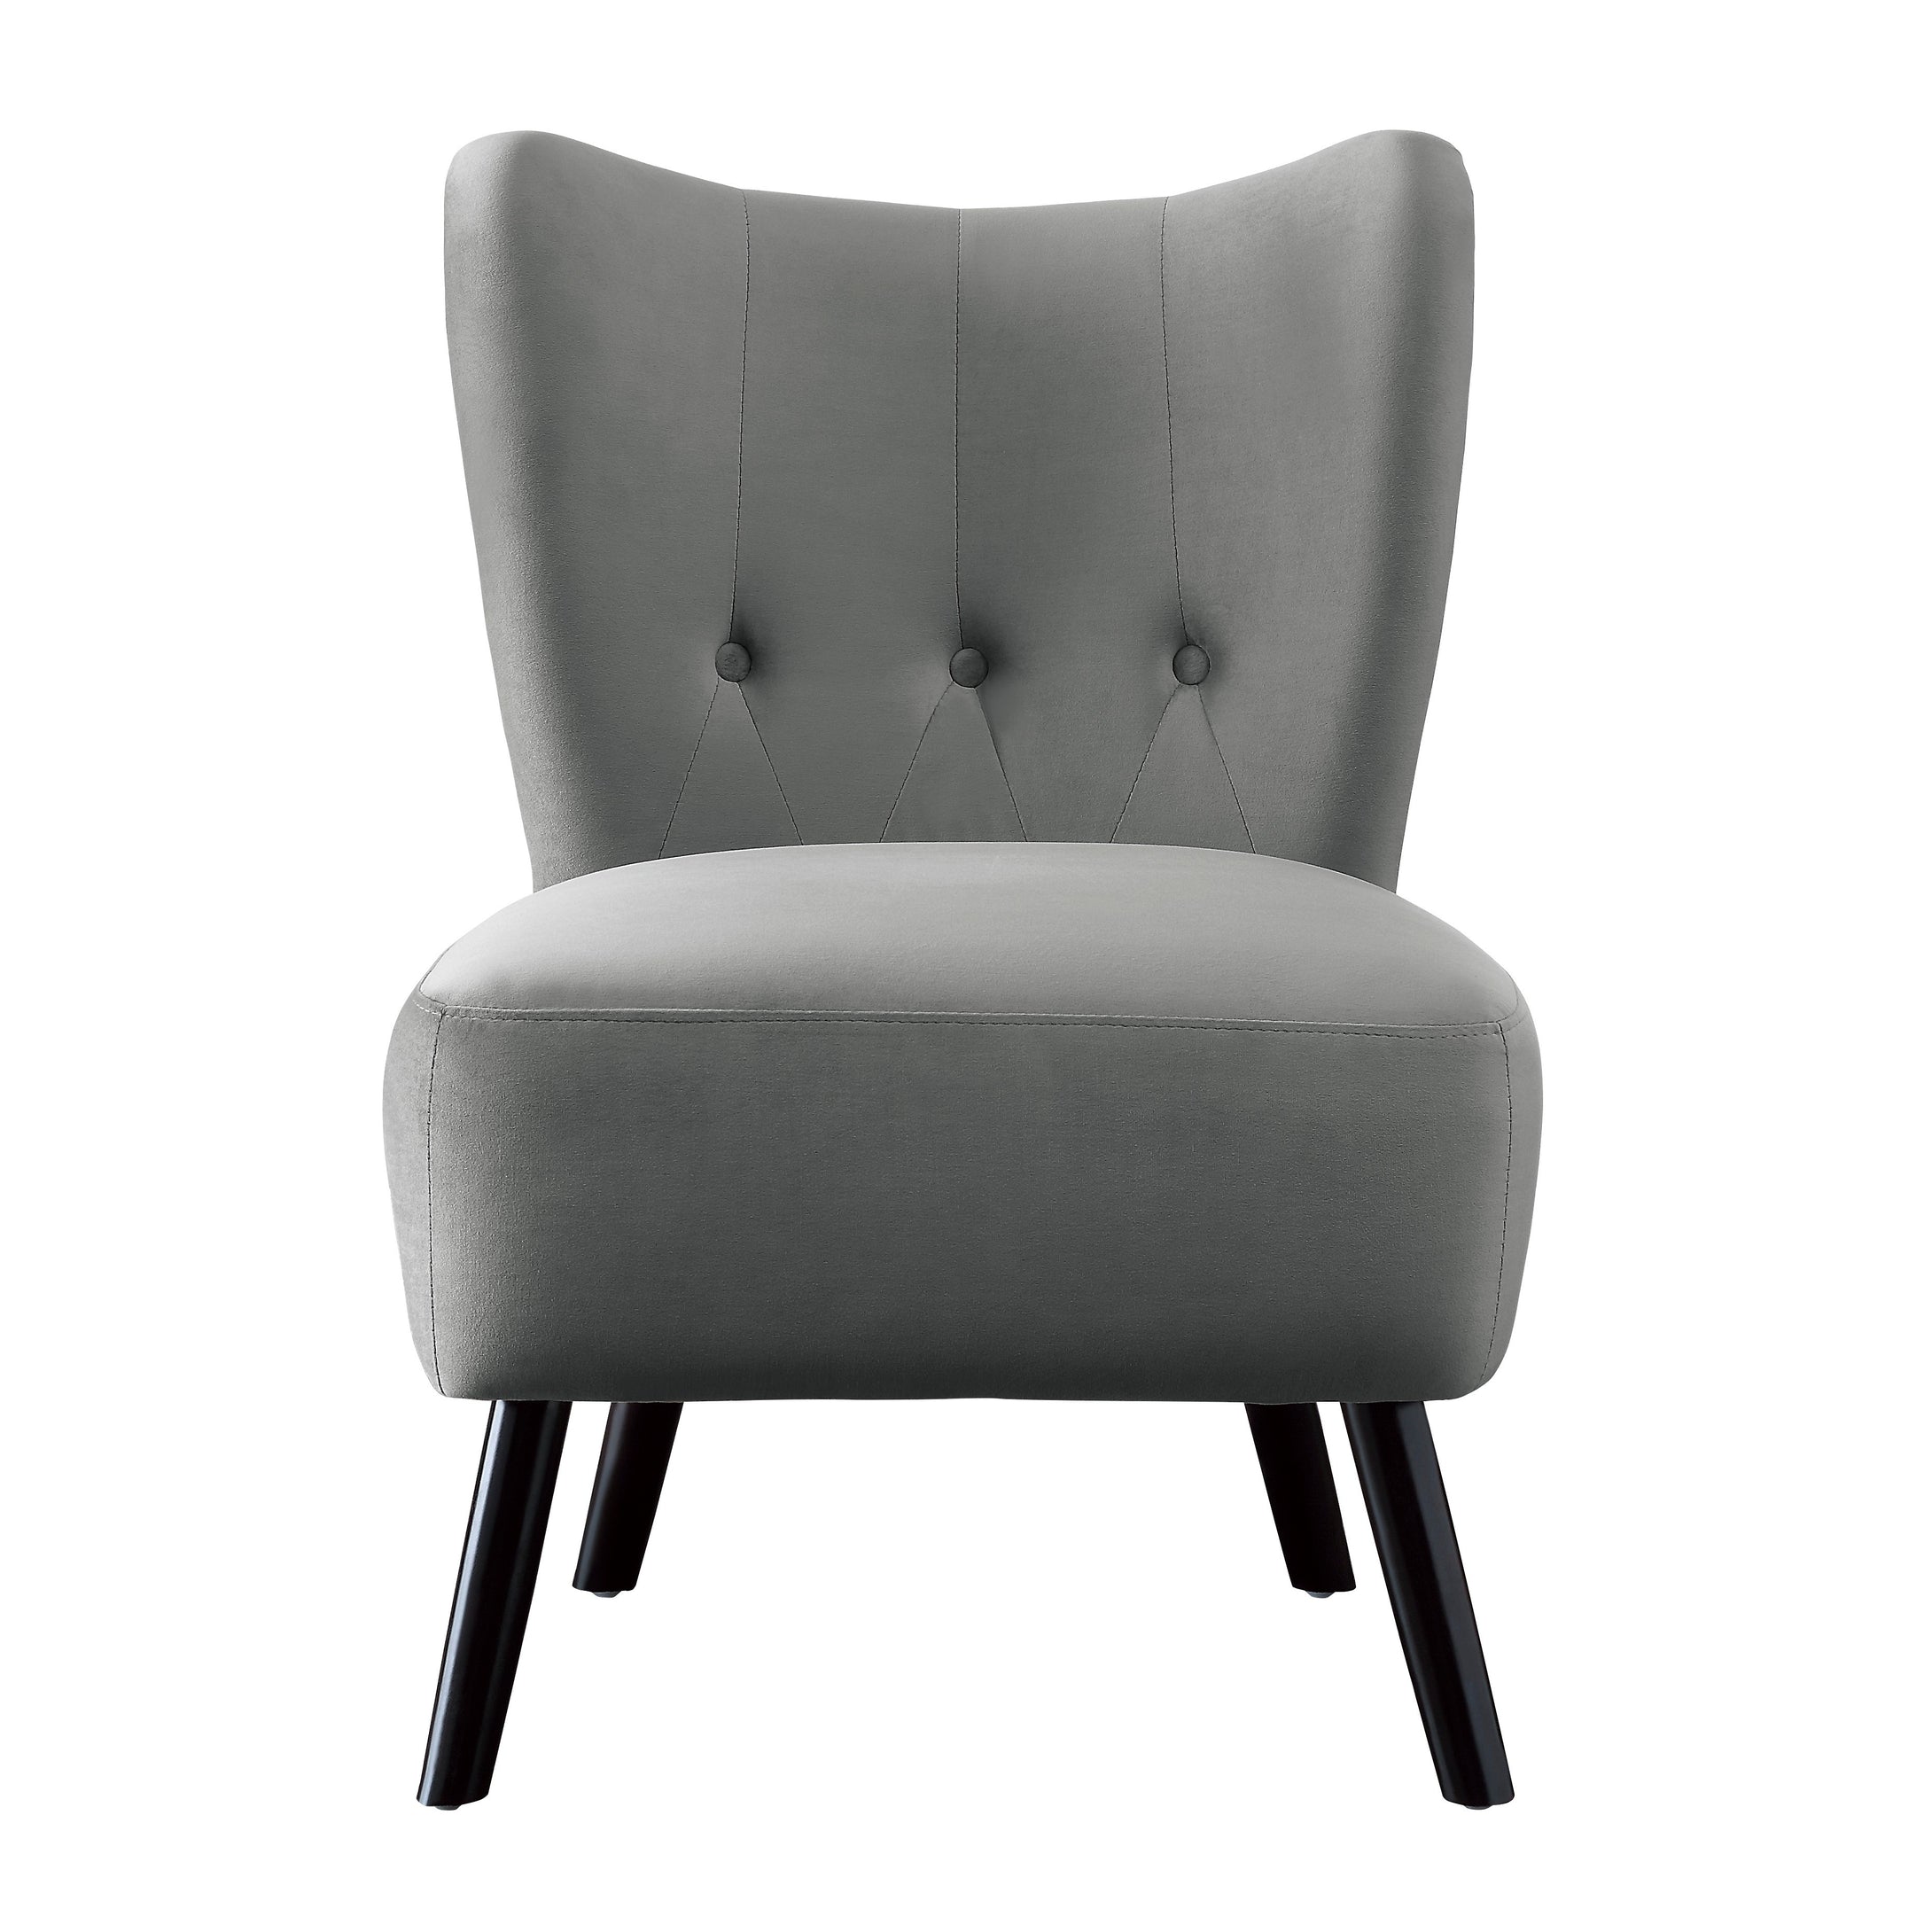 1166GY-1 Accent Chair